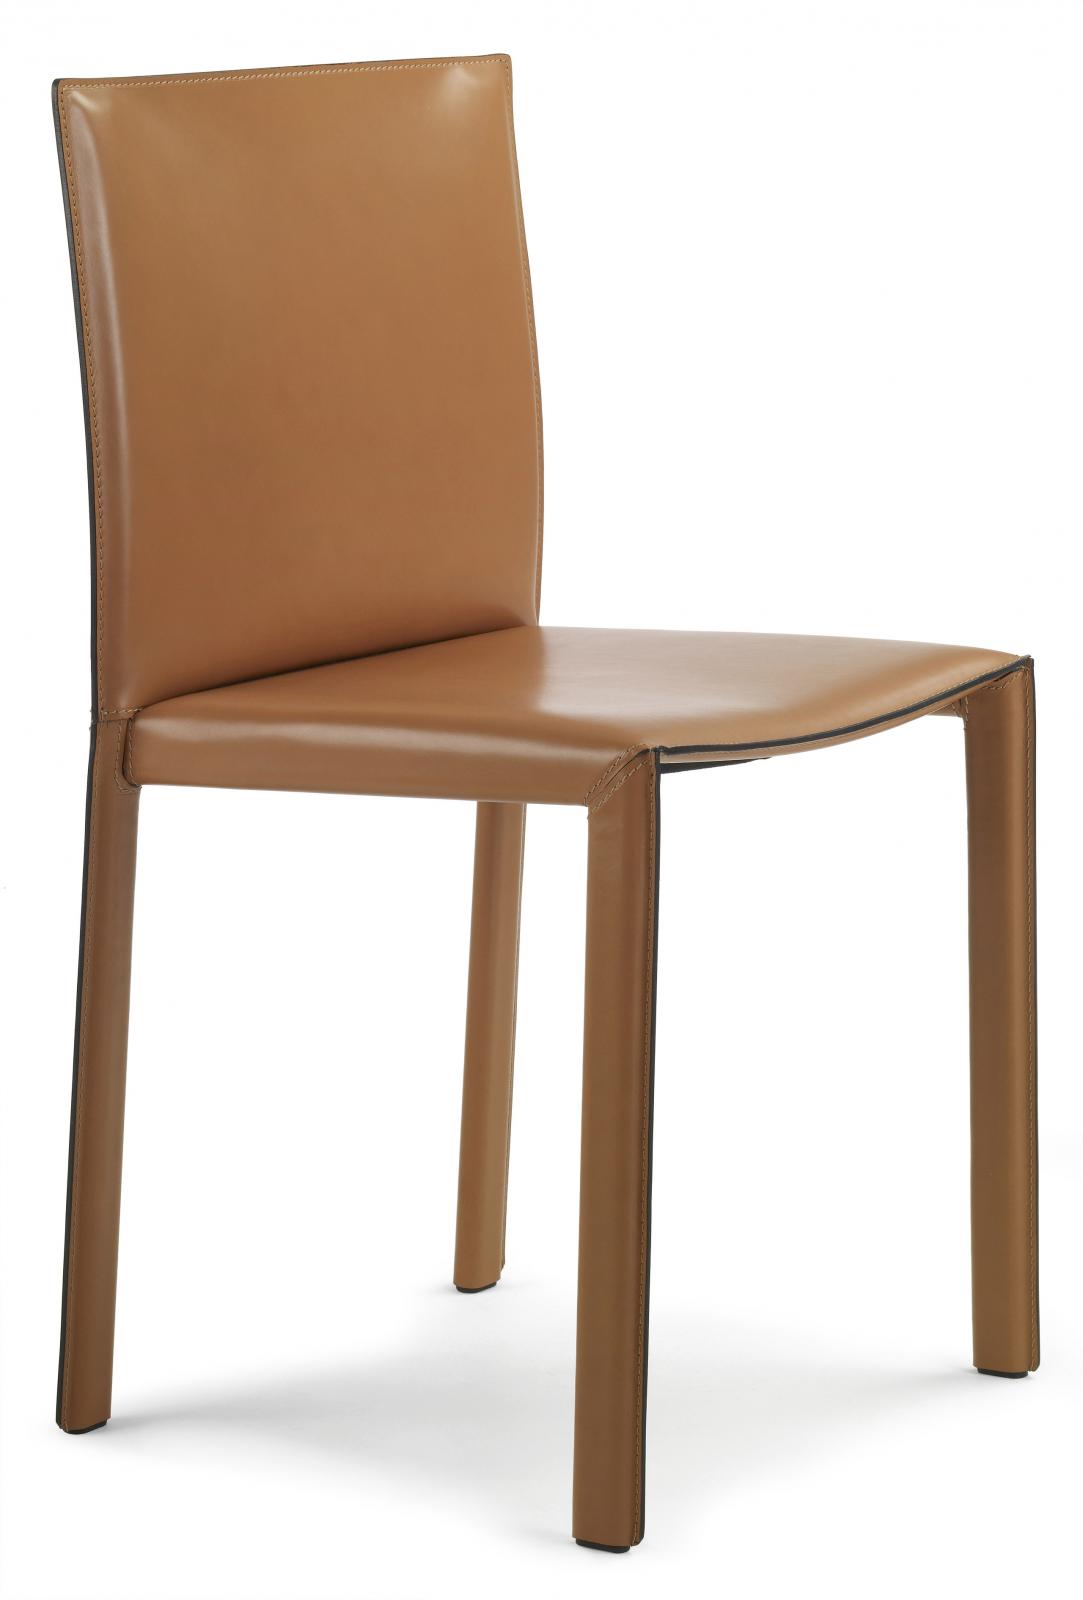 Dining chairs made of Italian leather modern ... 3 ... QFMHBNF